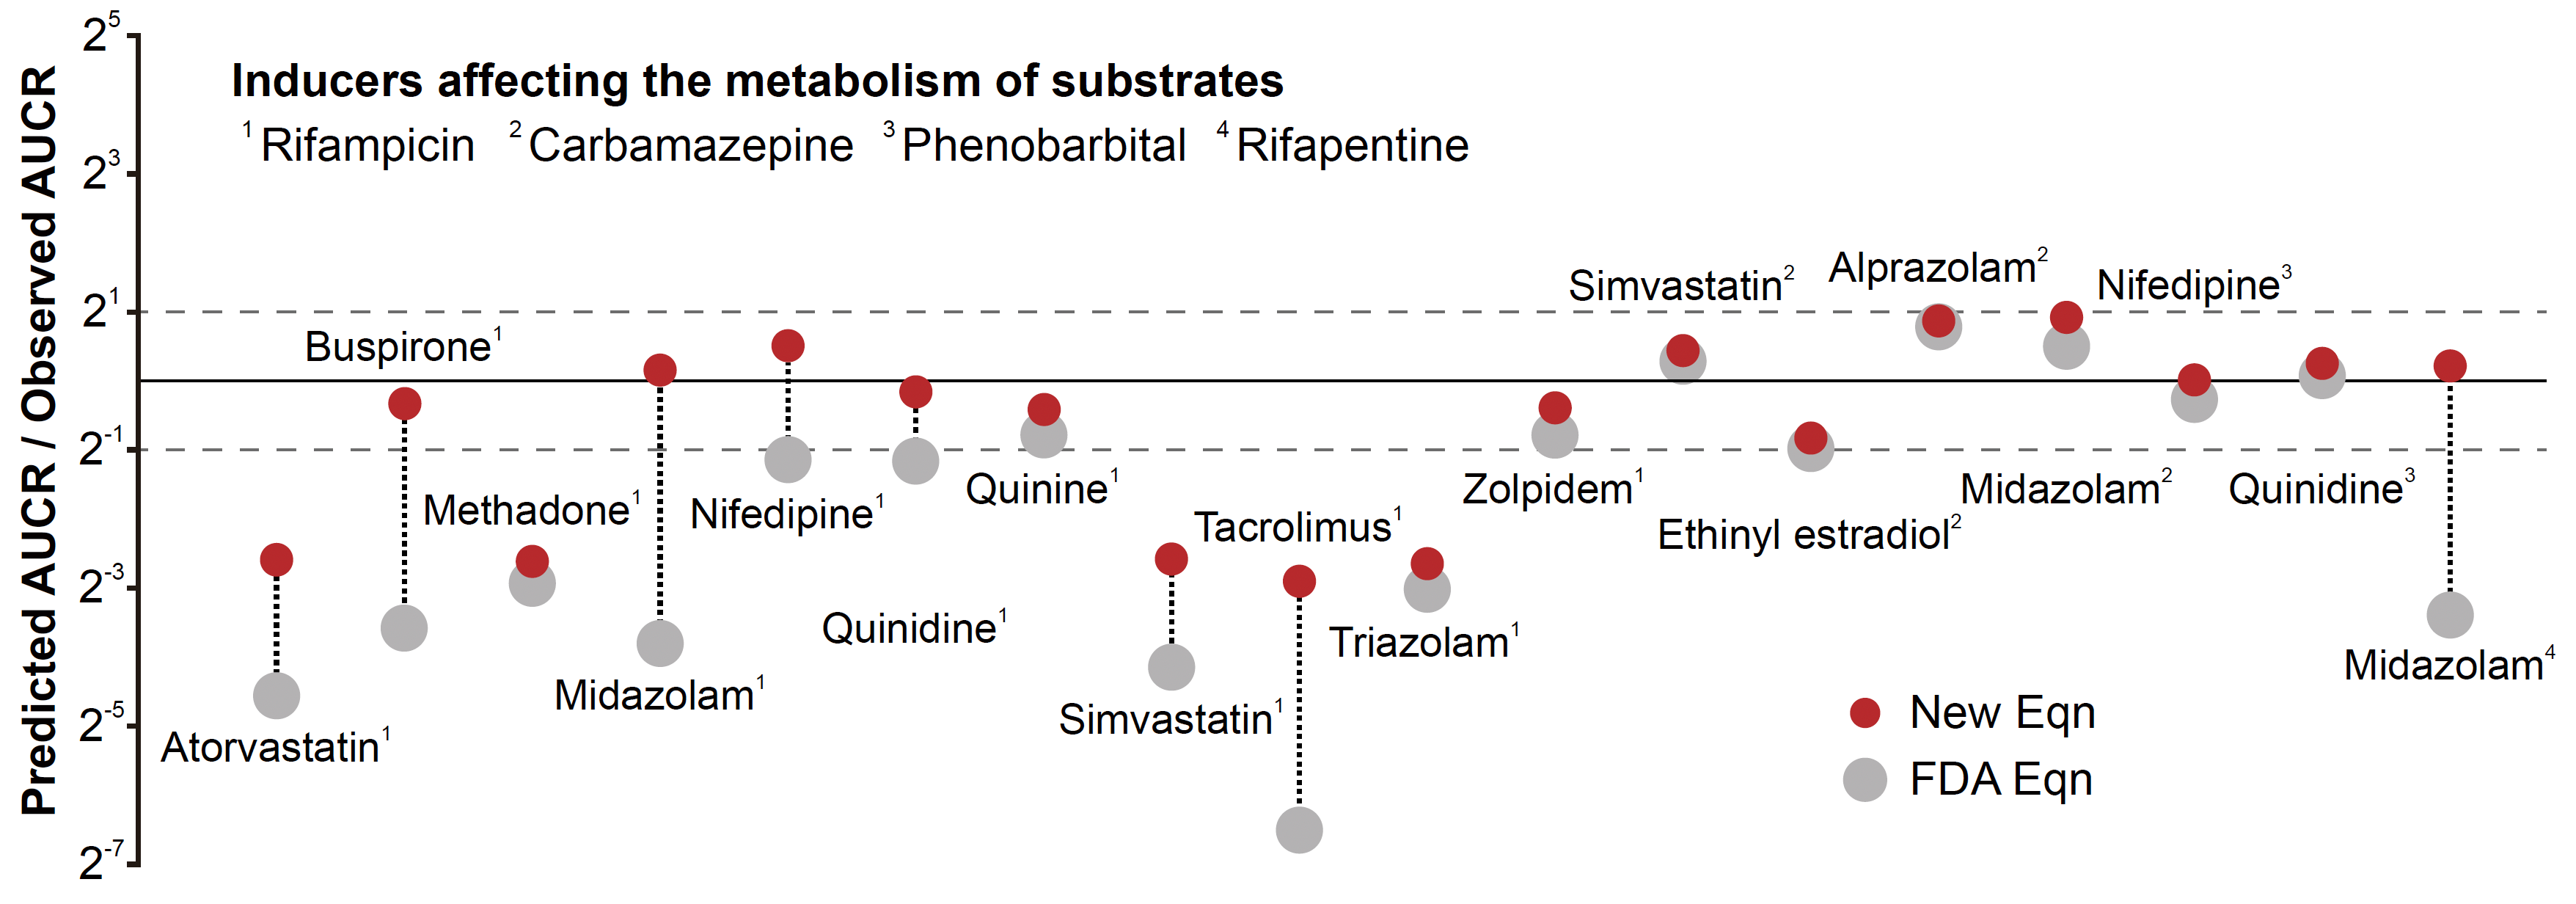 Figure 2. The new equation provides more accurate predictions than the conventional FDA equation. The FDA equation with Fg estimated assuming Fa = 1 underpredicts the area under the curve ratio (AUCR), which represents the drug-drug interaction mediated by CYP enzyme induction, for numerous drug pairs (grey dots). On the other hand, the new equation with re-estimated Fg predicts the AUCR within two-fold errors for nearly double the number of drug pairs than the conventional FDA equation. Solid and dashed lines are the line of precise prediction and two-fold error, respectively.